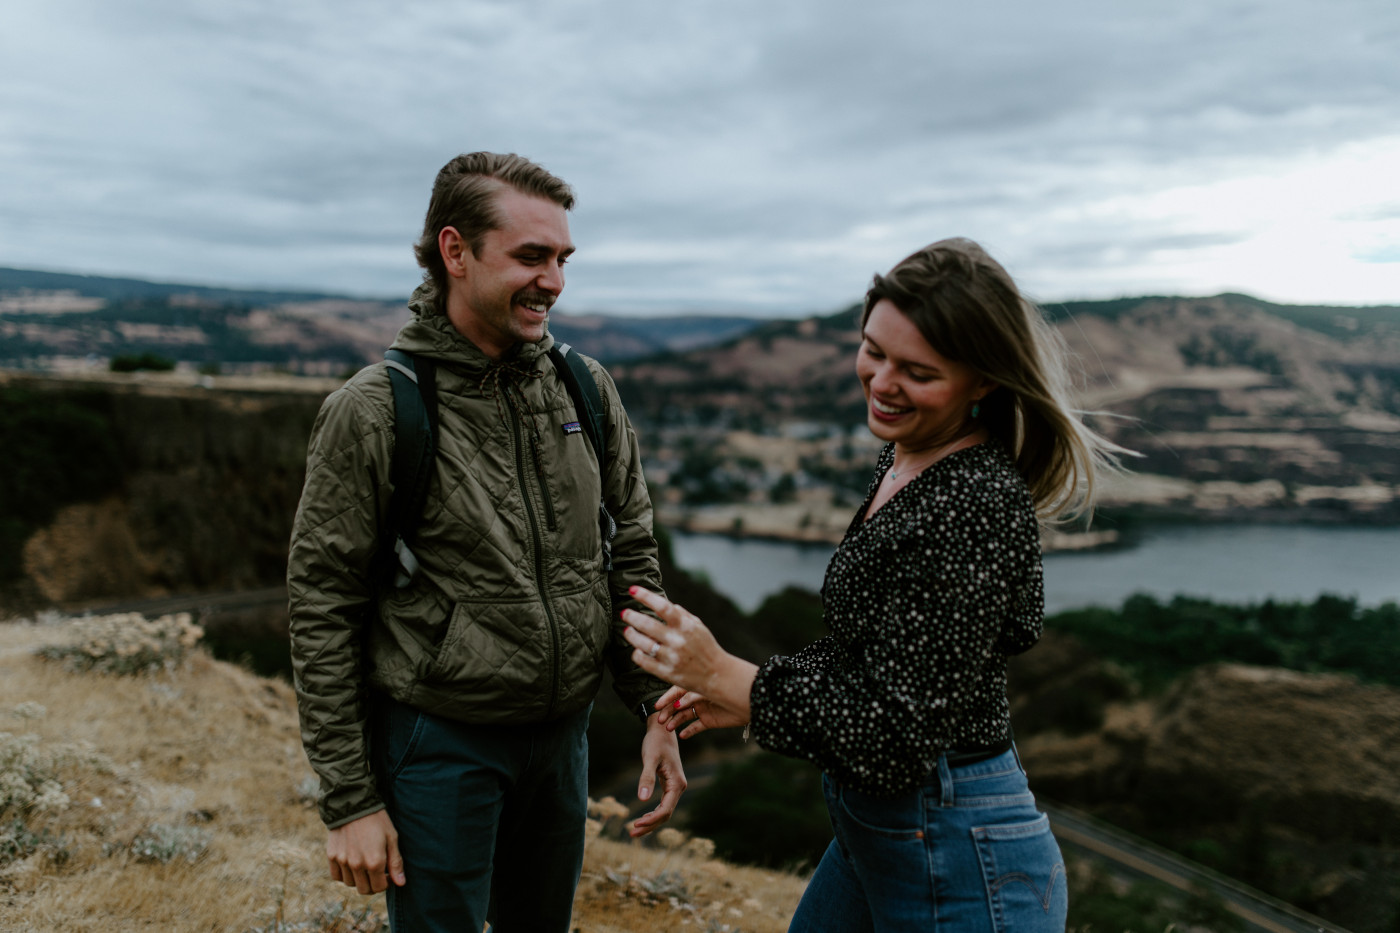 Emily and Greyson laugh. Elopement photography at Rowena Crest by Sienna Plus Josh.